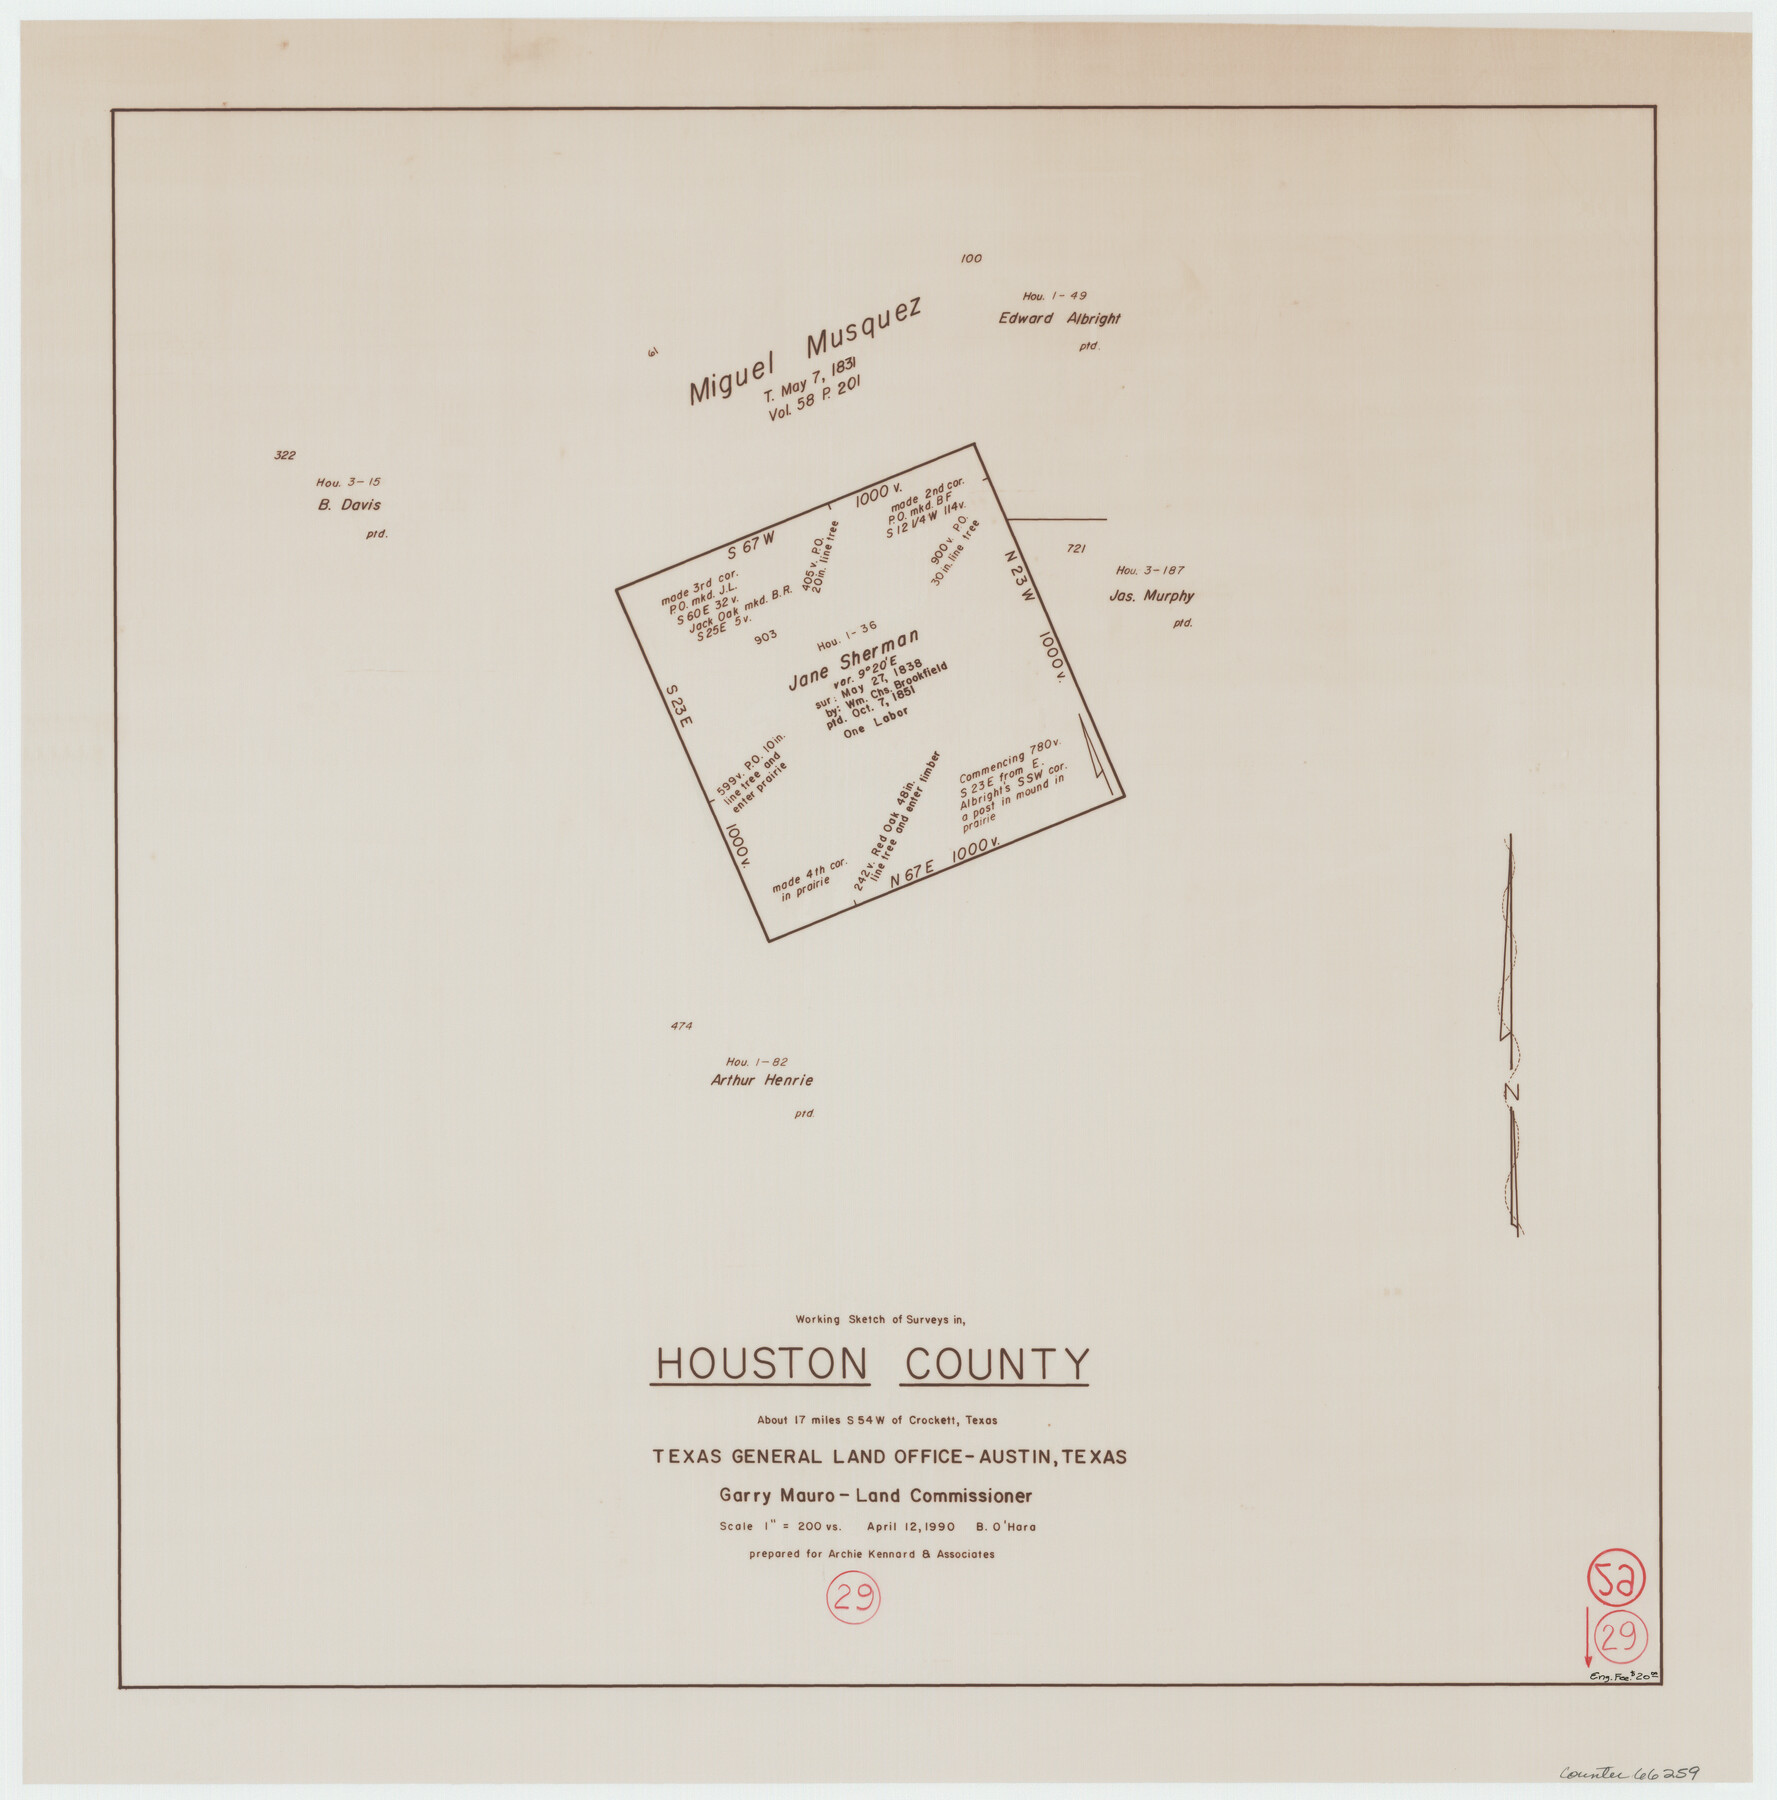 66259, Houston County Working Sketch 29, General Map Collection